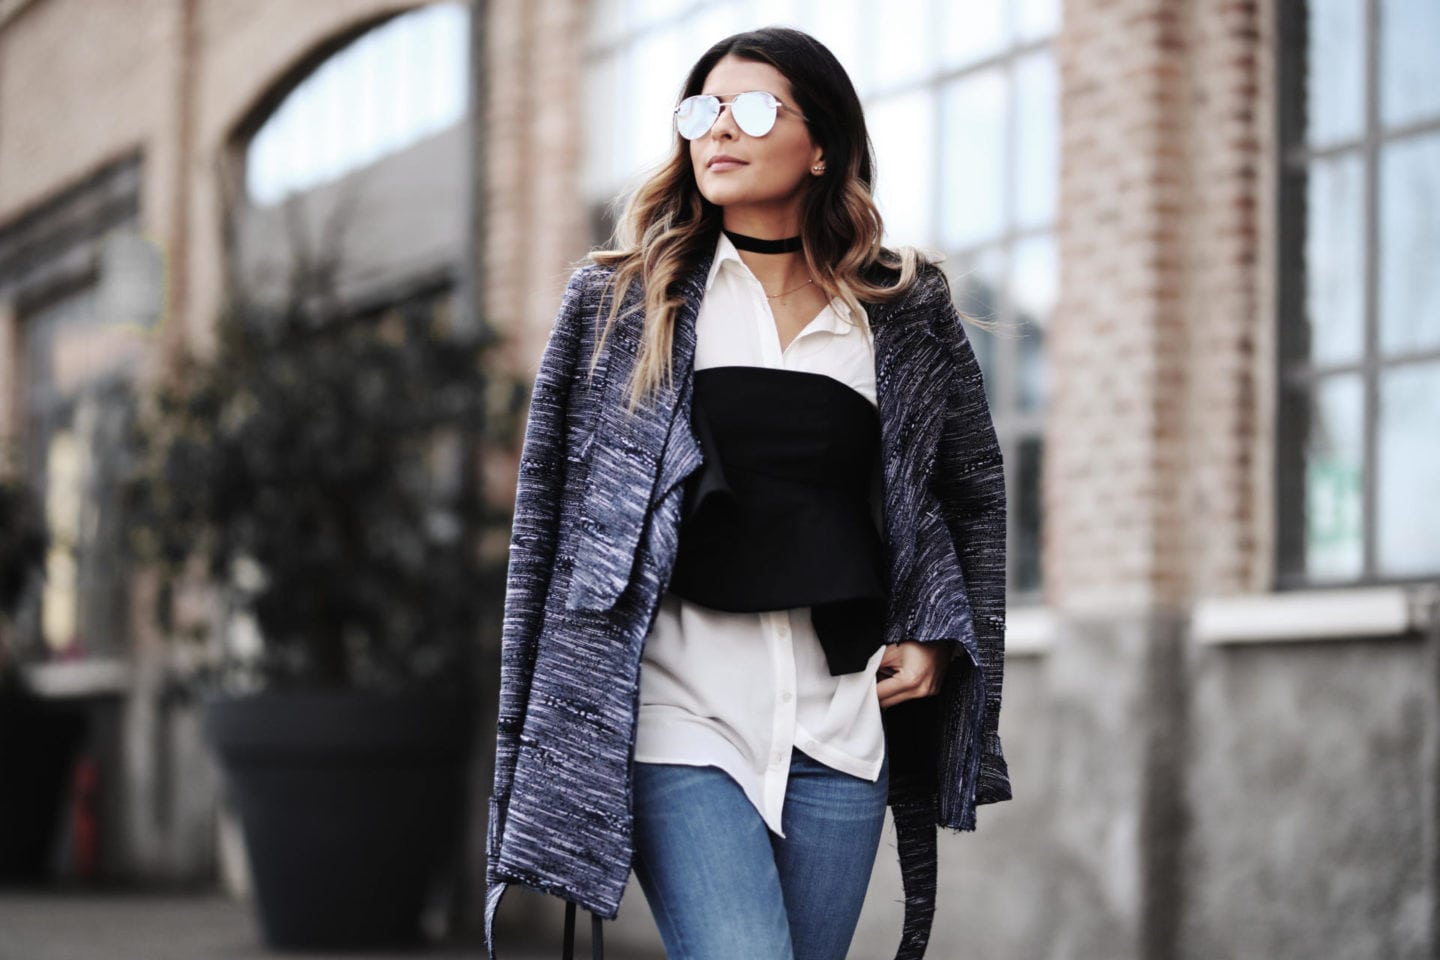 The Cool-Girl Draped Jacket Look - The Girl from Panama